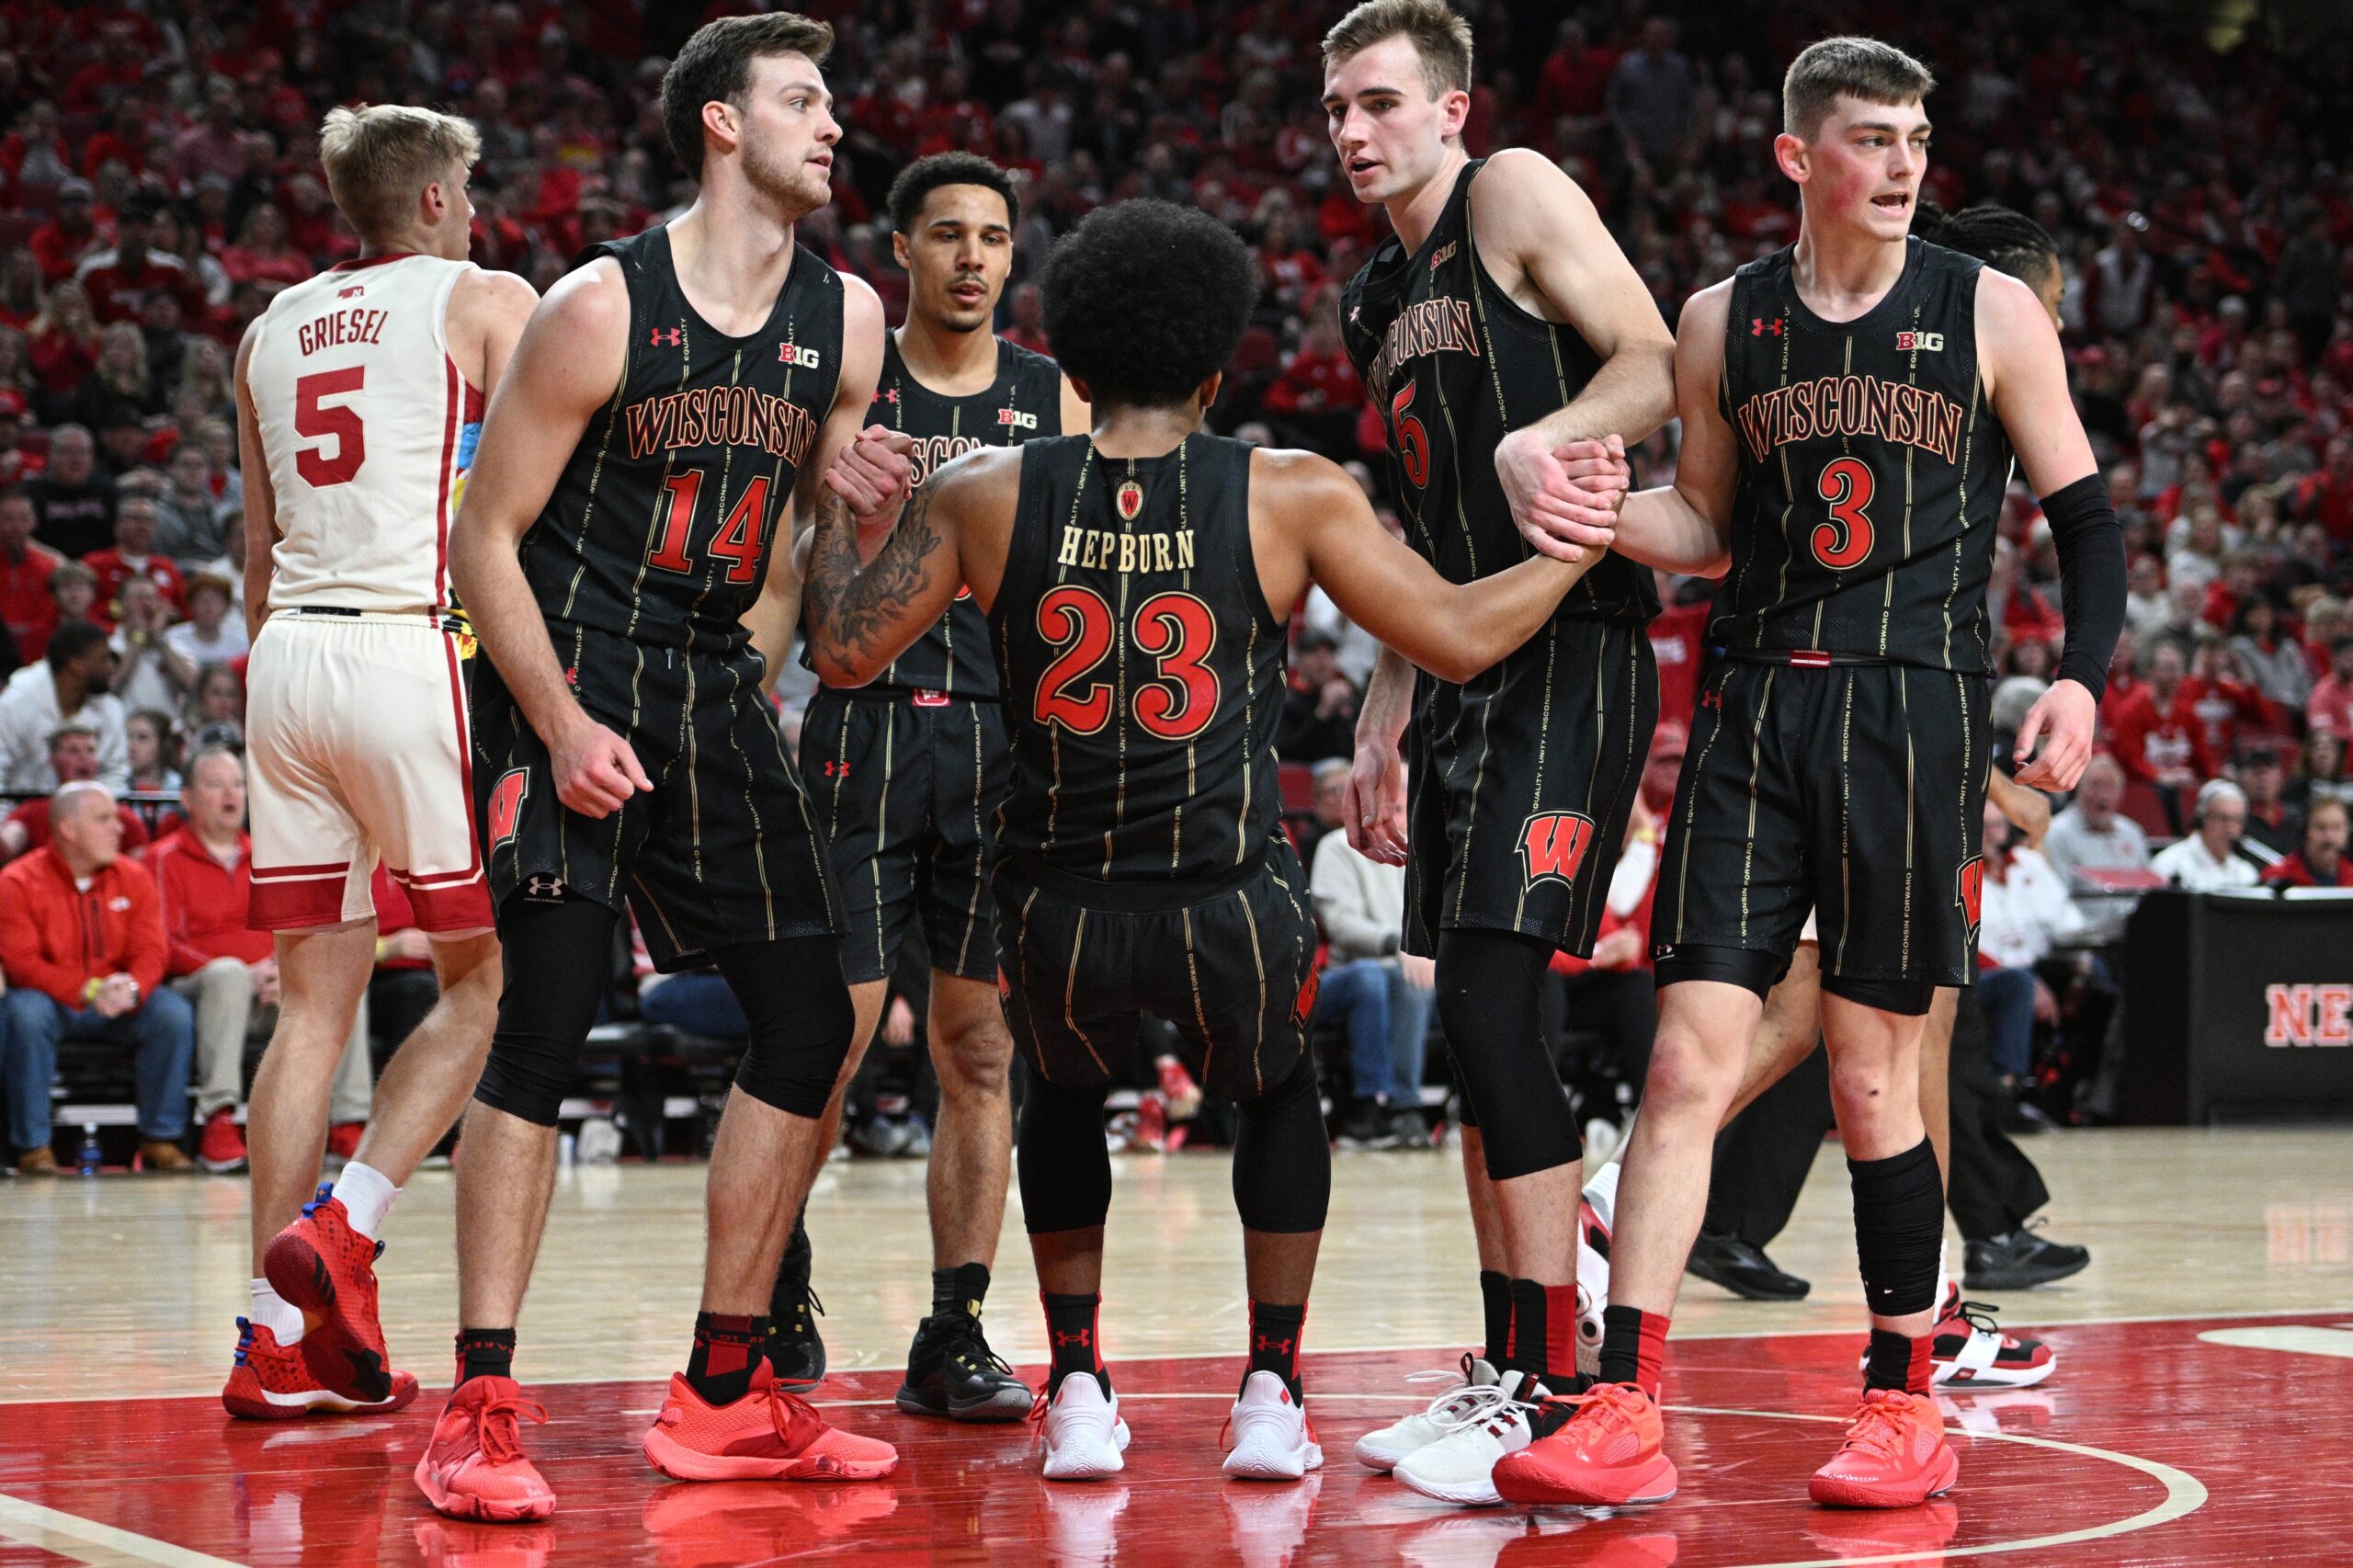 The Wisconsin Badgers suffered a meltdown loss to Nebraska